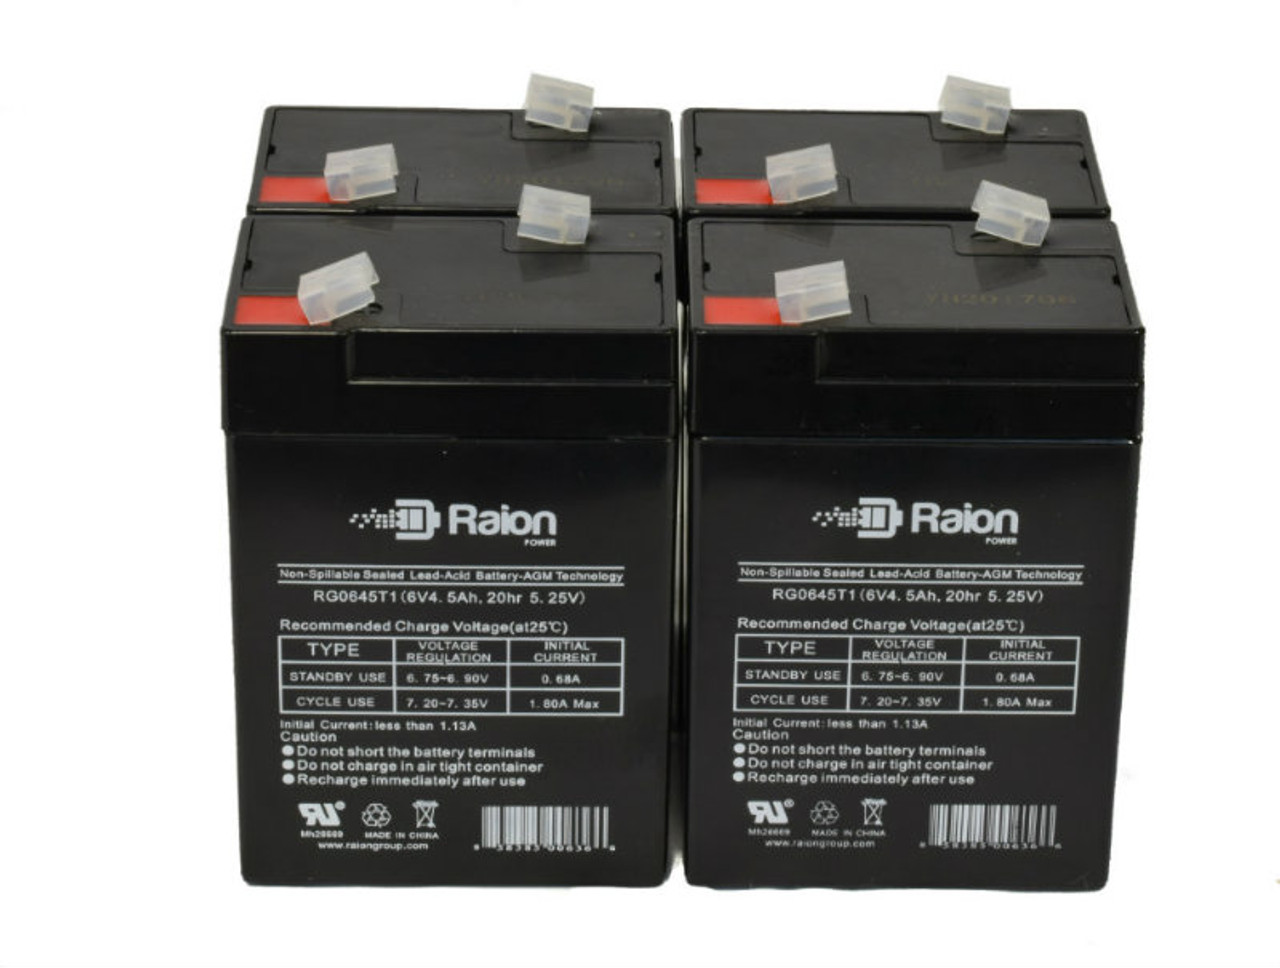 Raion Power 6V 4.5Ah Replacement Emergency Light Battery for Dual-Lite HCXURB - 4 Pack